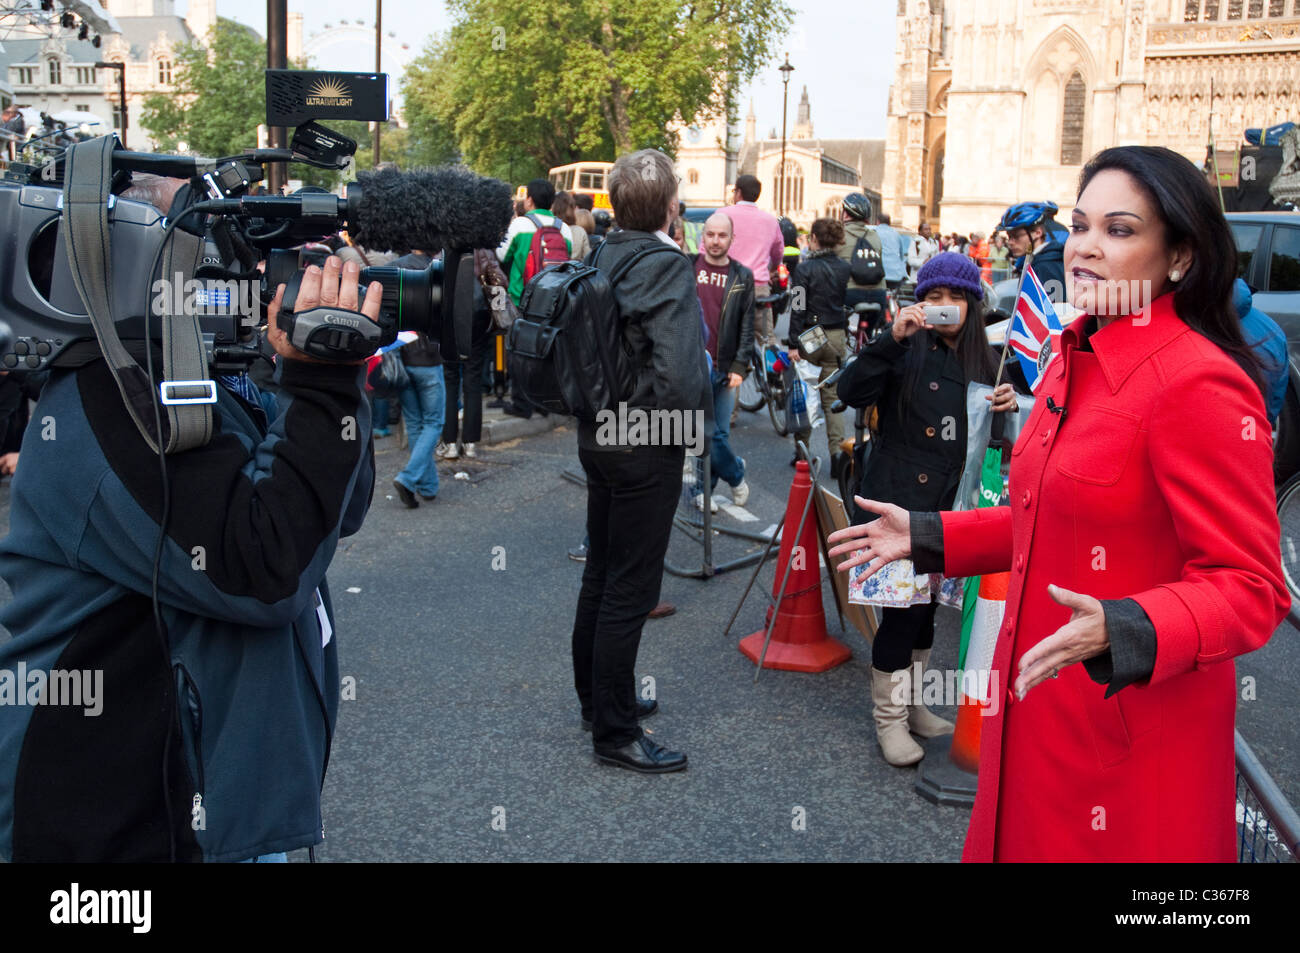 Scene from around Westminster Abbey on the eve of the Royal wedding of Prince William and Kate Middleton, April 2011. Stock Photo